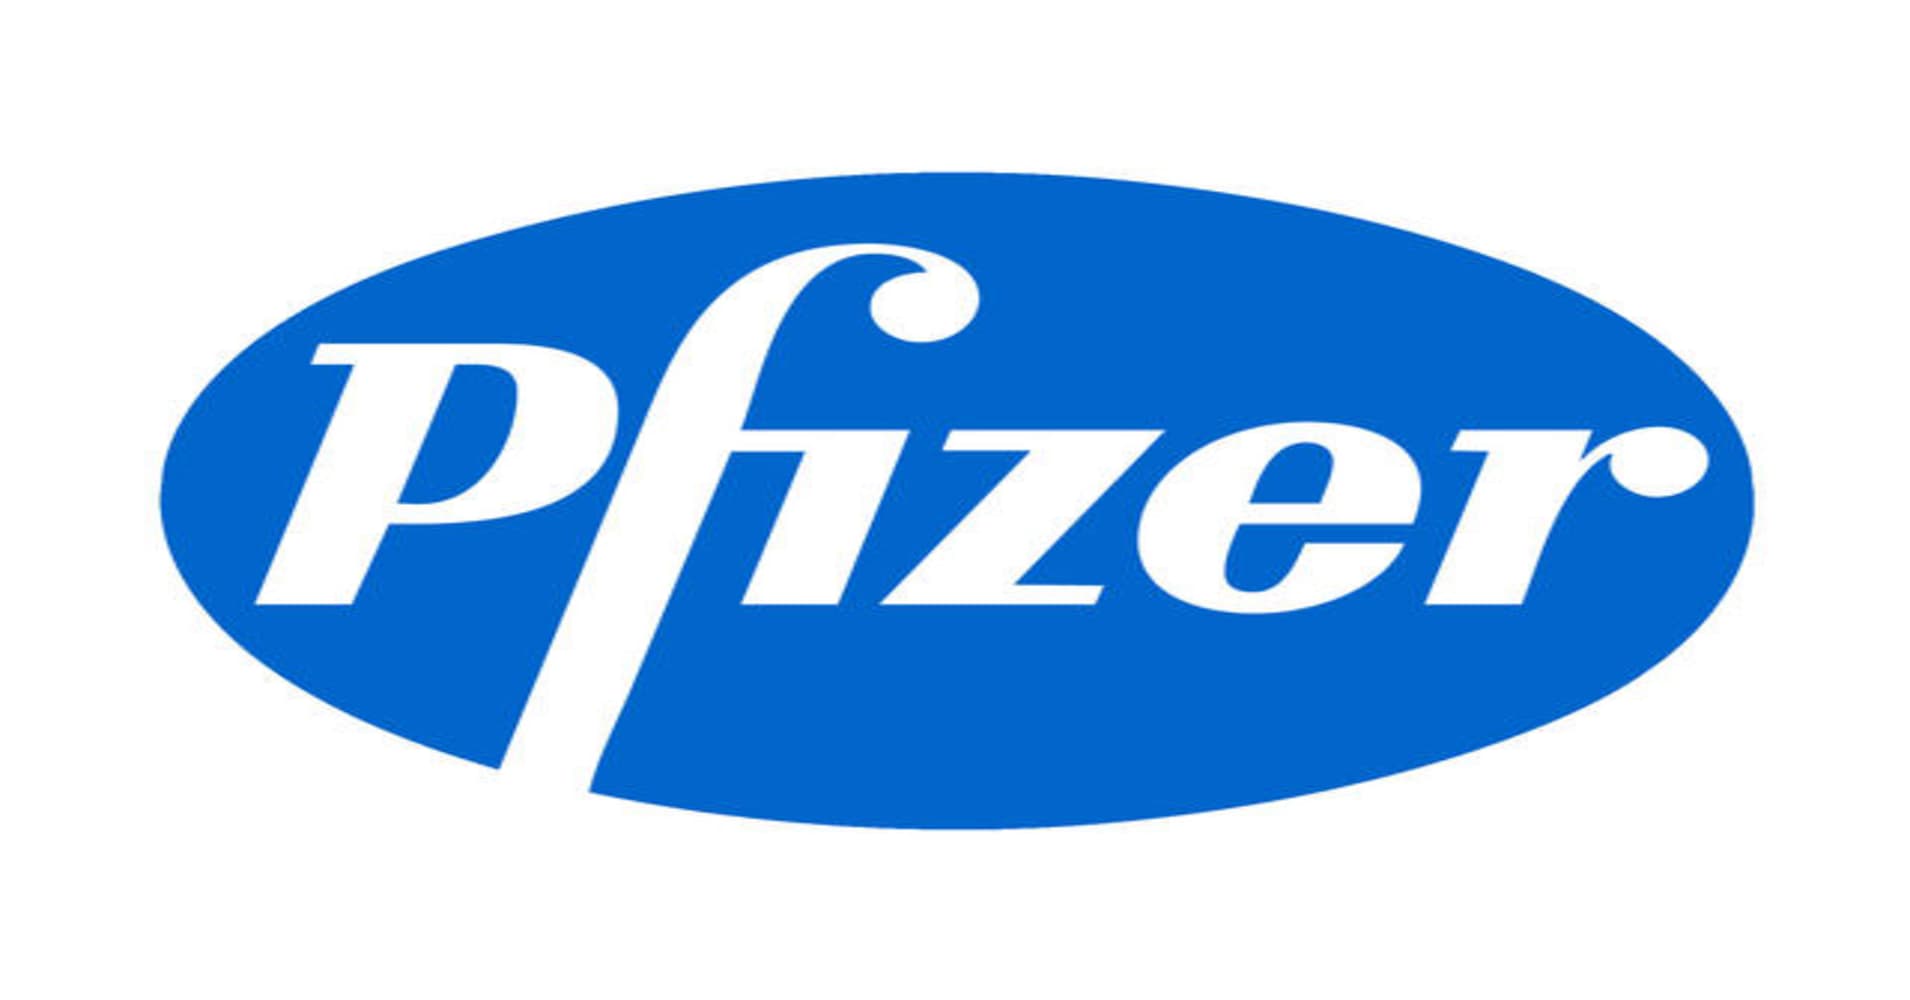 miamorcakedesign-is-pfizer-a-buy